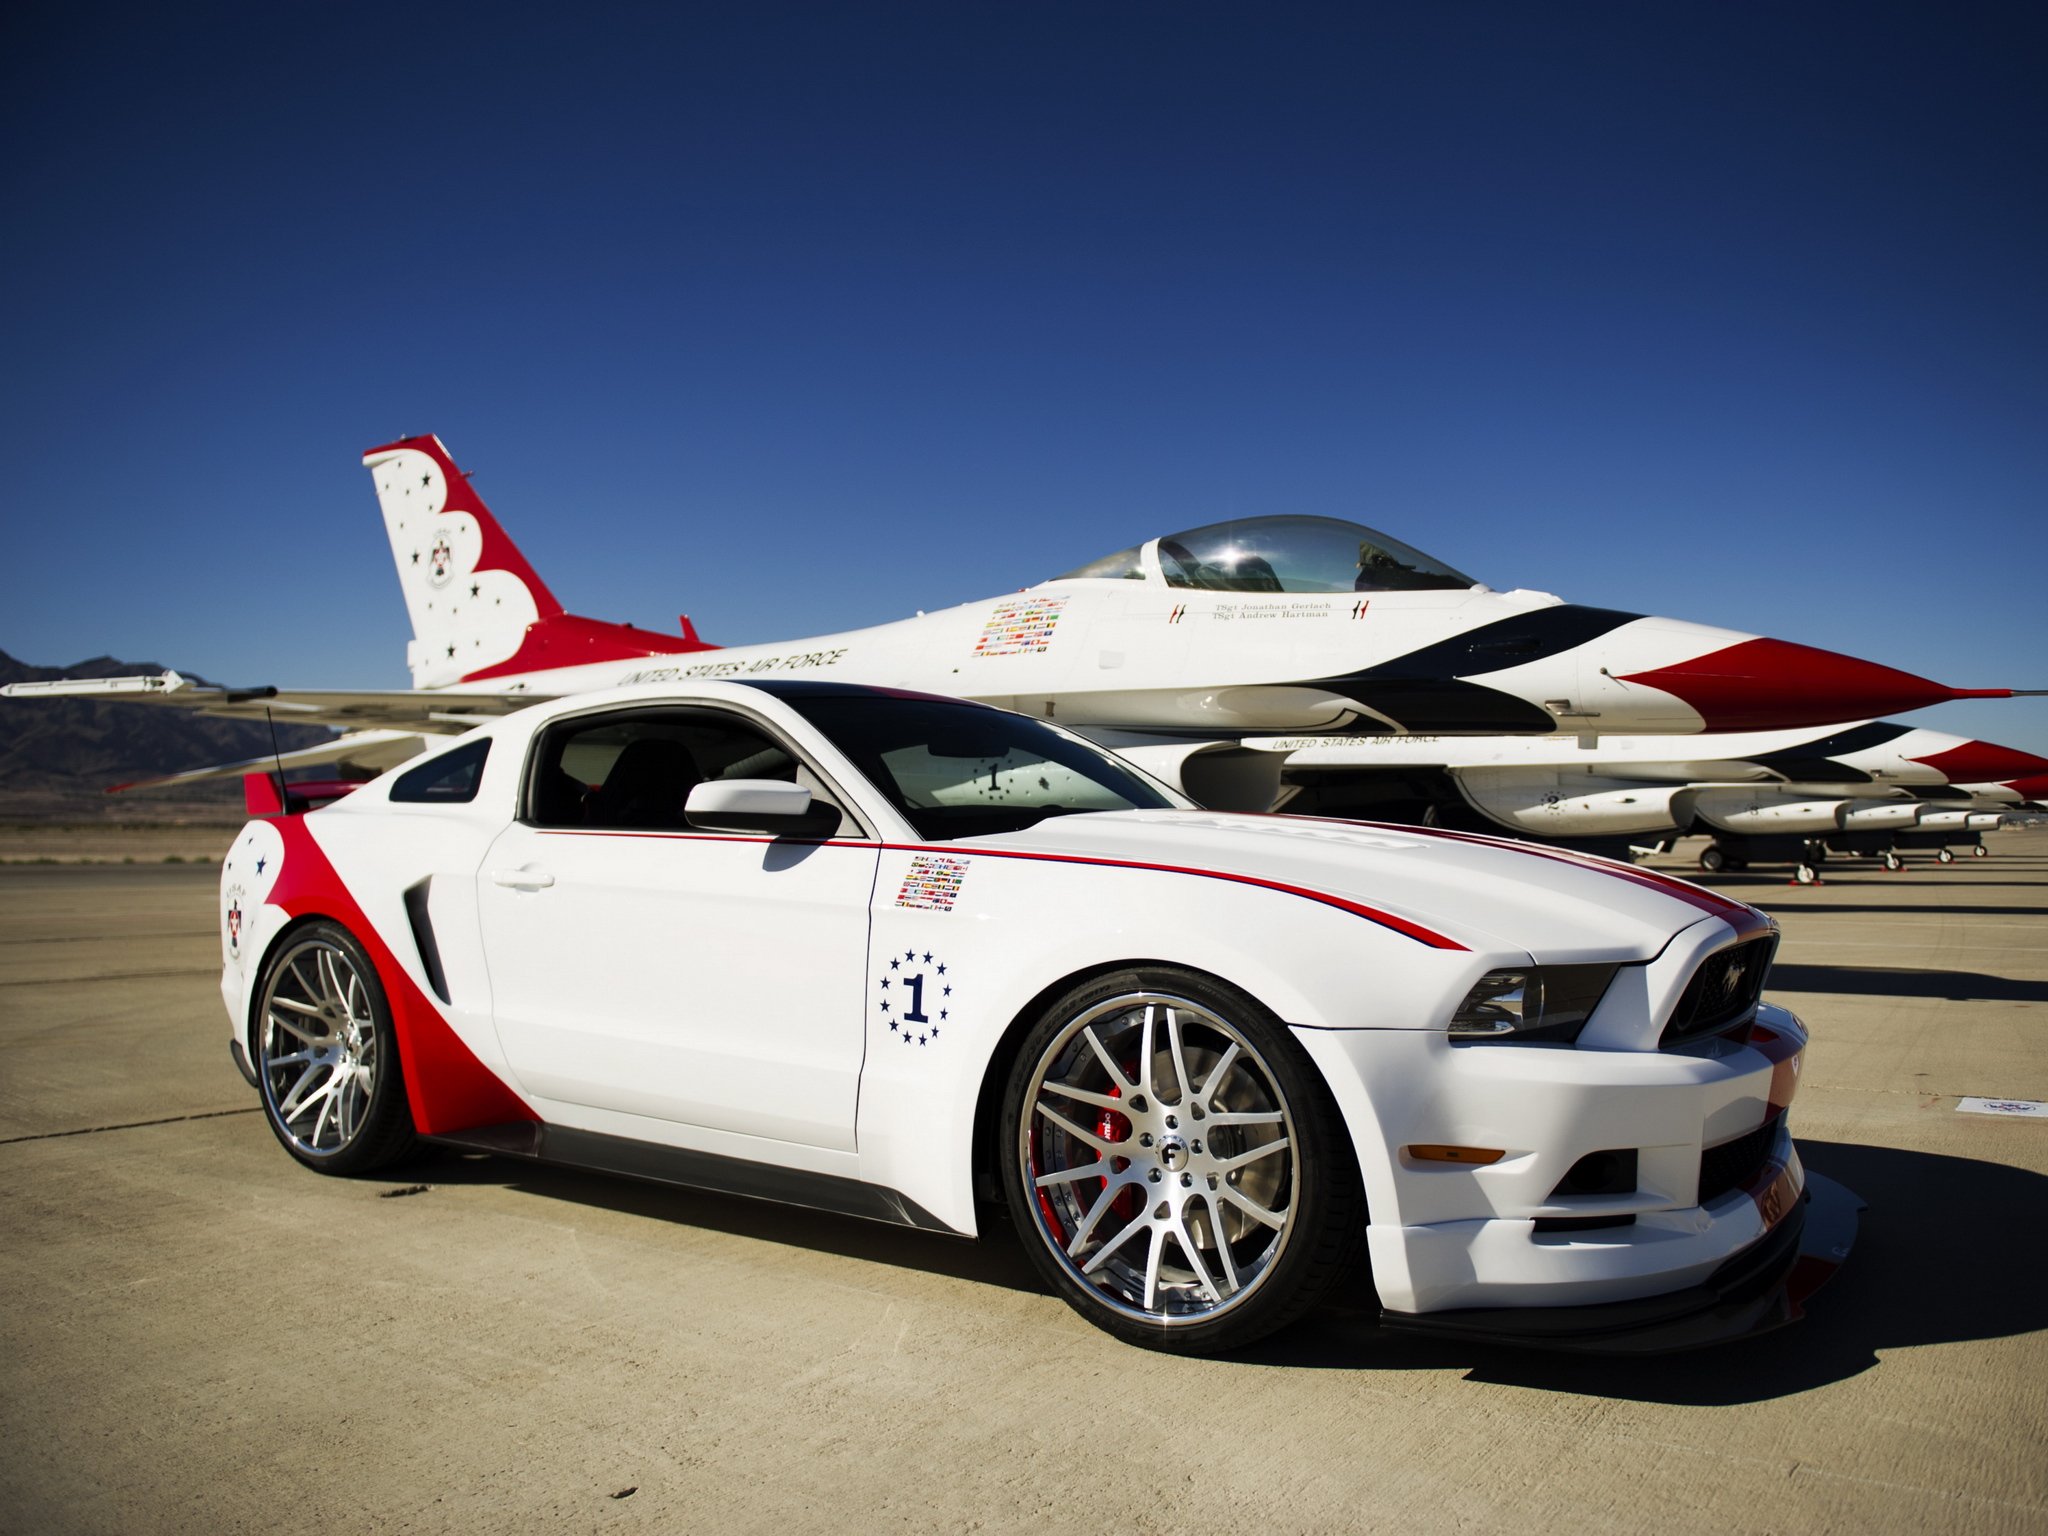 2014, Ford, Mustang, G t, Usa, Air, Force, Thunderbirds, Muscle, Tuning, Hot, Rod, Rods, Military, Jet Wallpaper